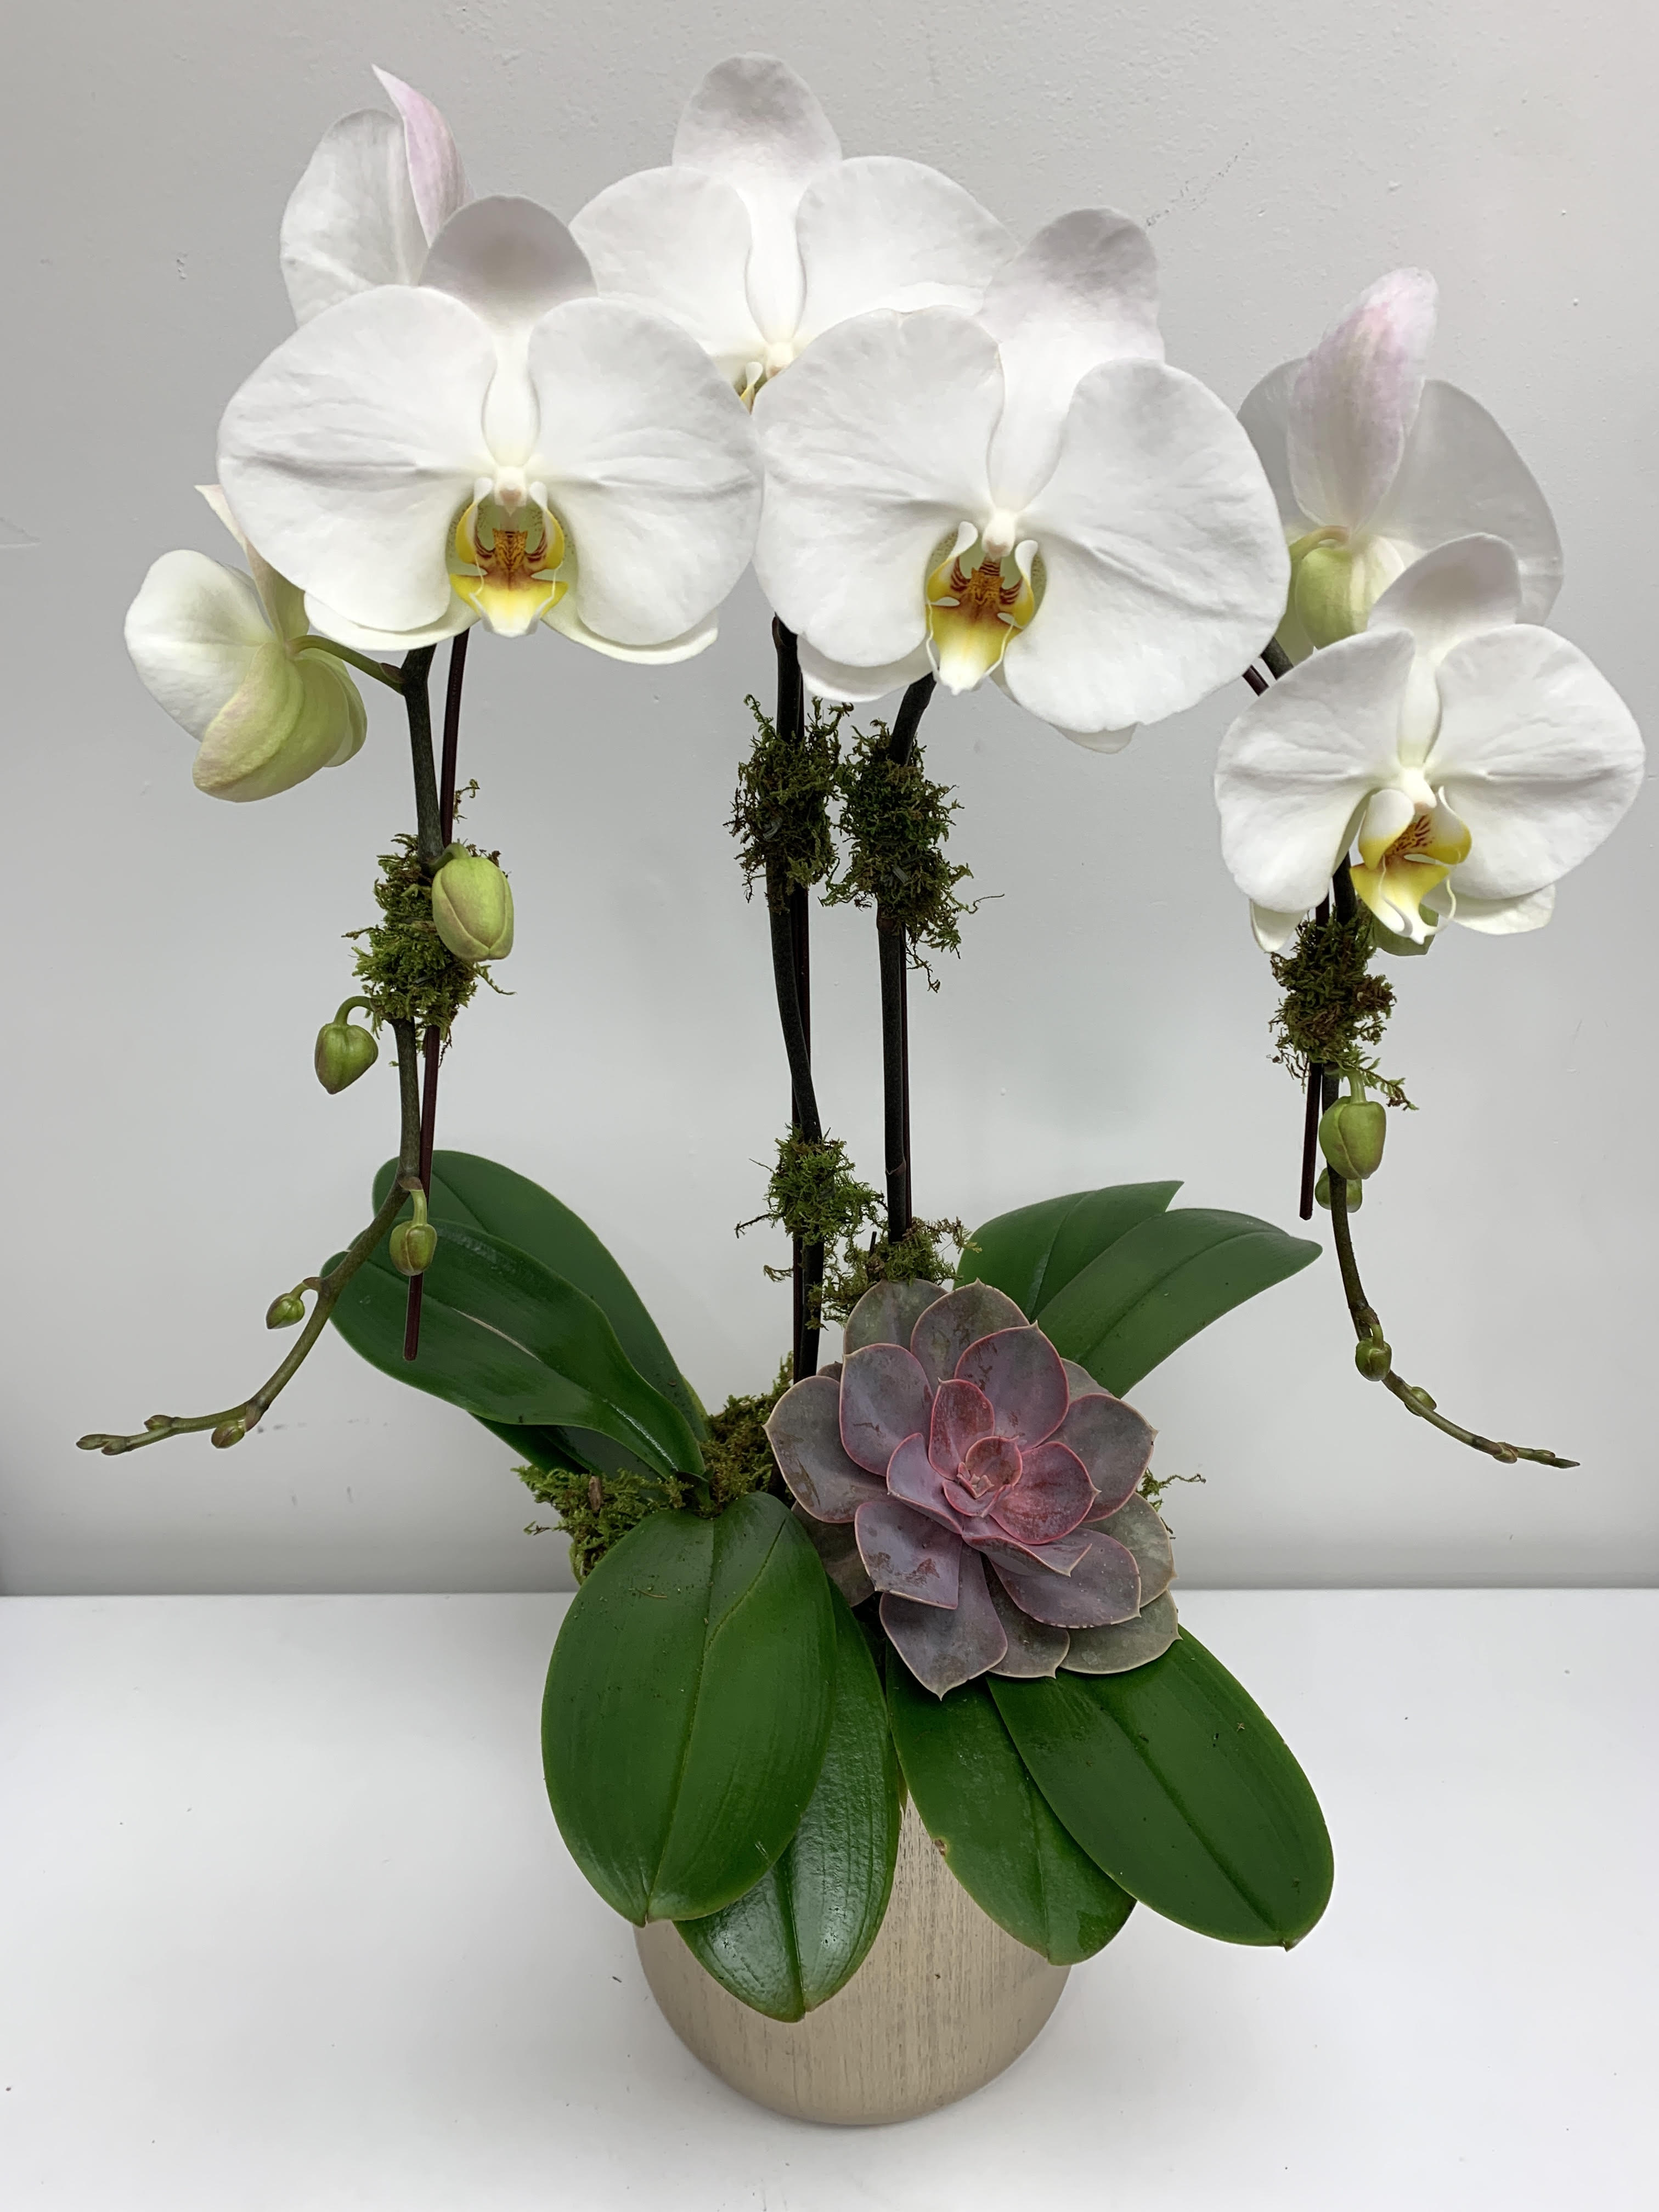 White Orchid Duo in Gold Pot - White Orchid Duo in Gold Pot. Measures 24” x 8”.